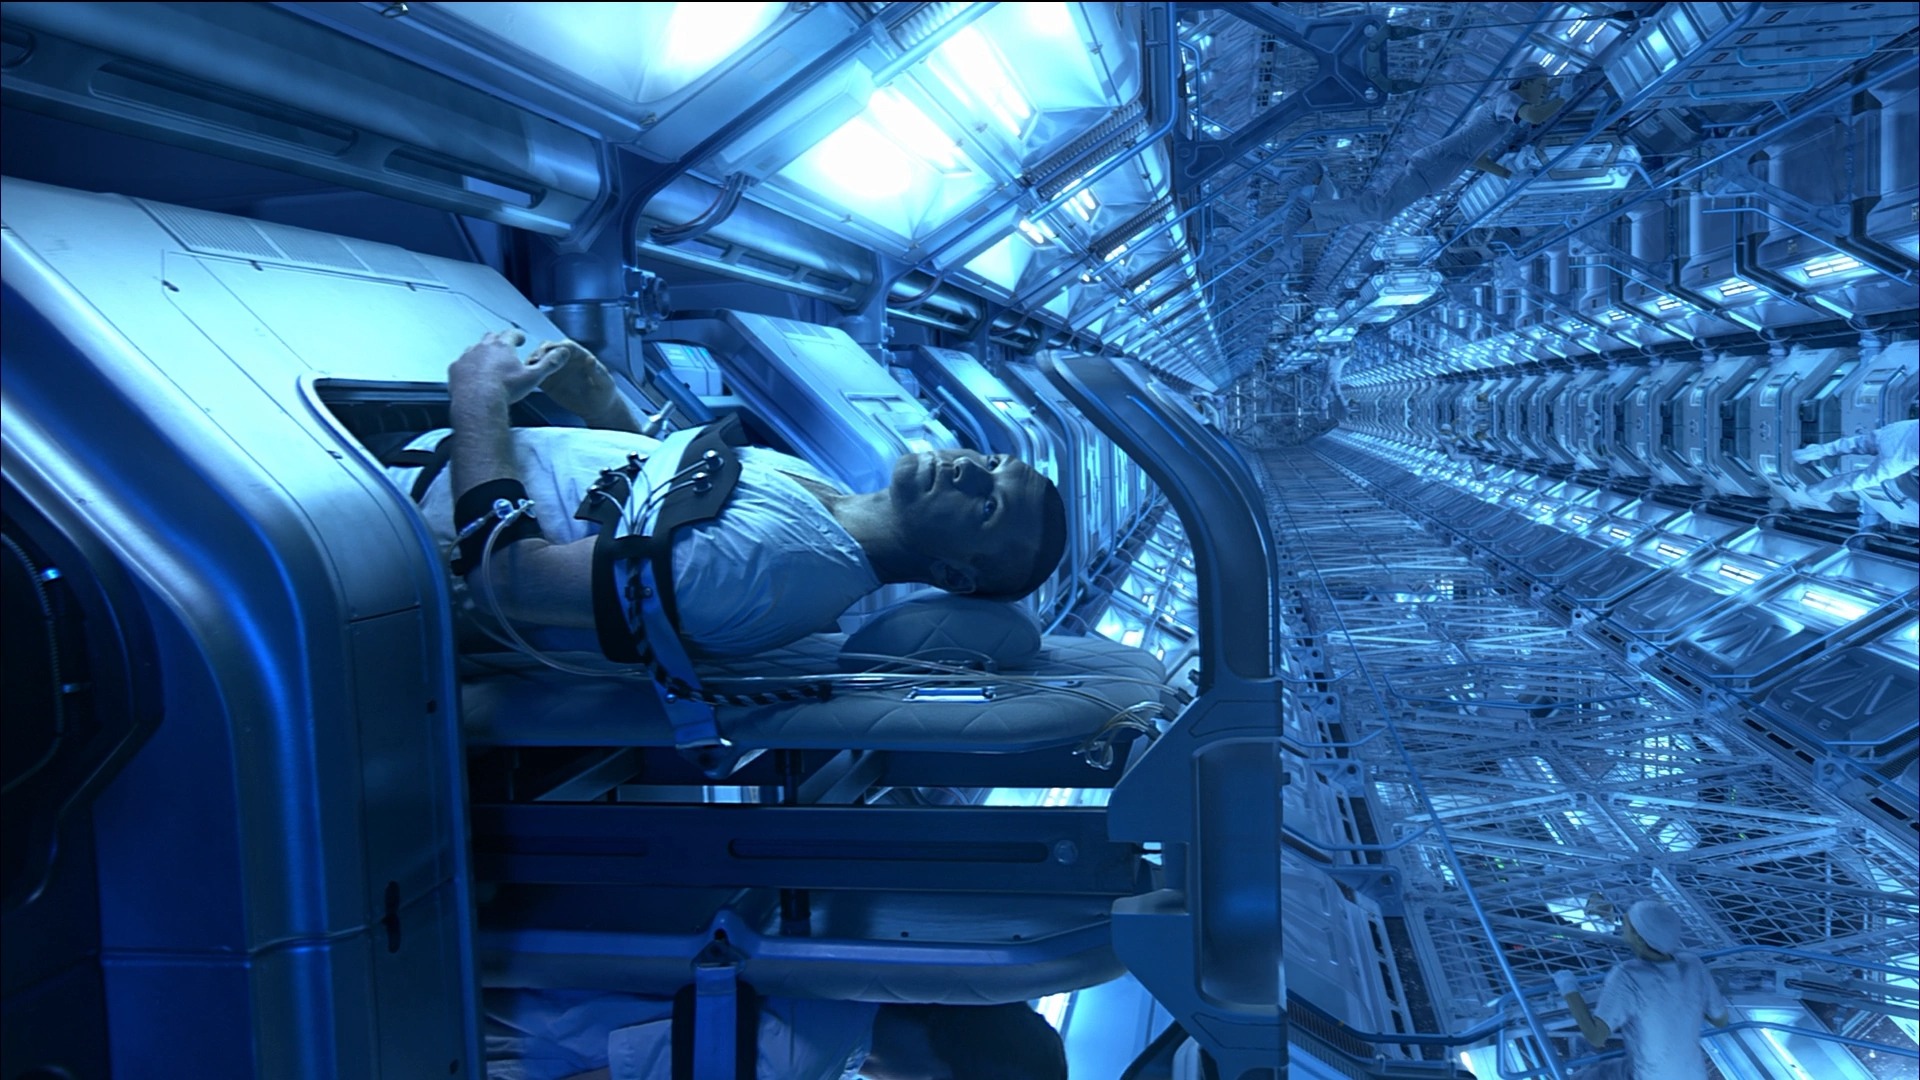 Research Into Human Hibernation For Long Distance Spaceflight – Space Ref